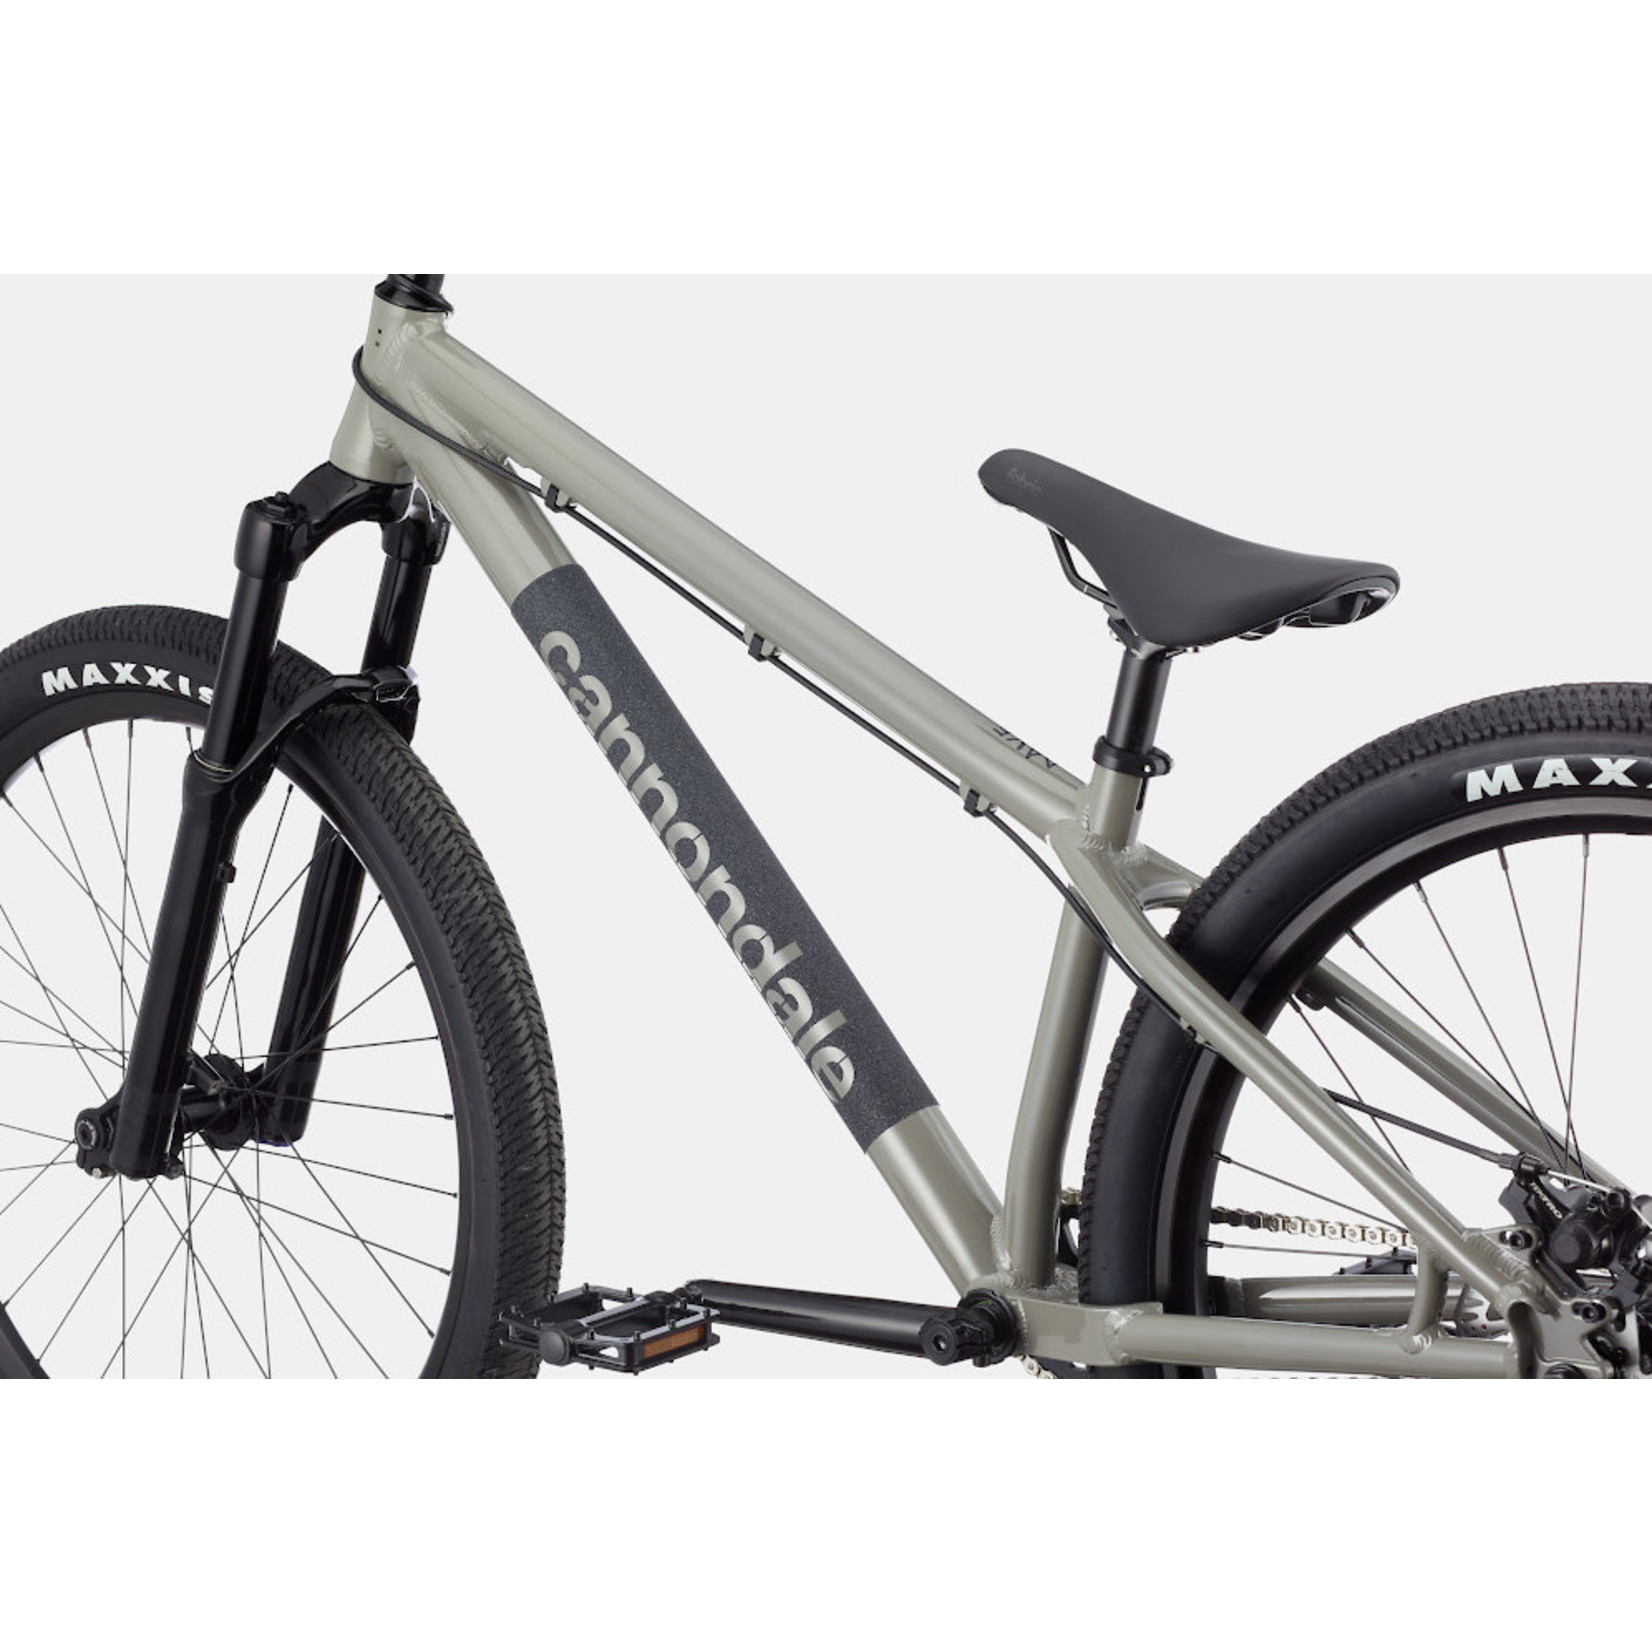 Cannondale Cannondale Dave 26 Stealth Grey OS